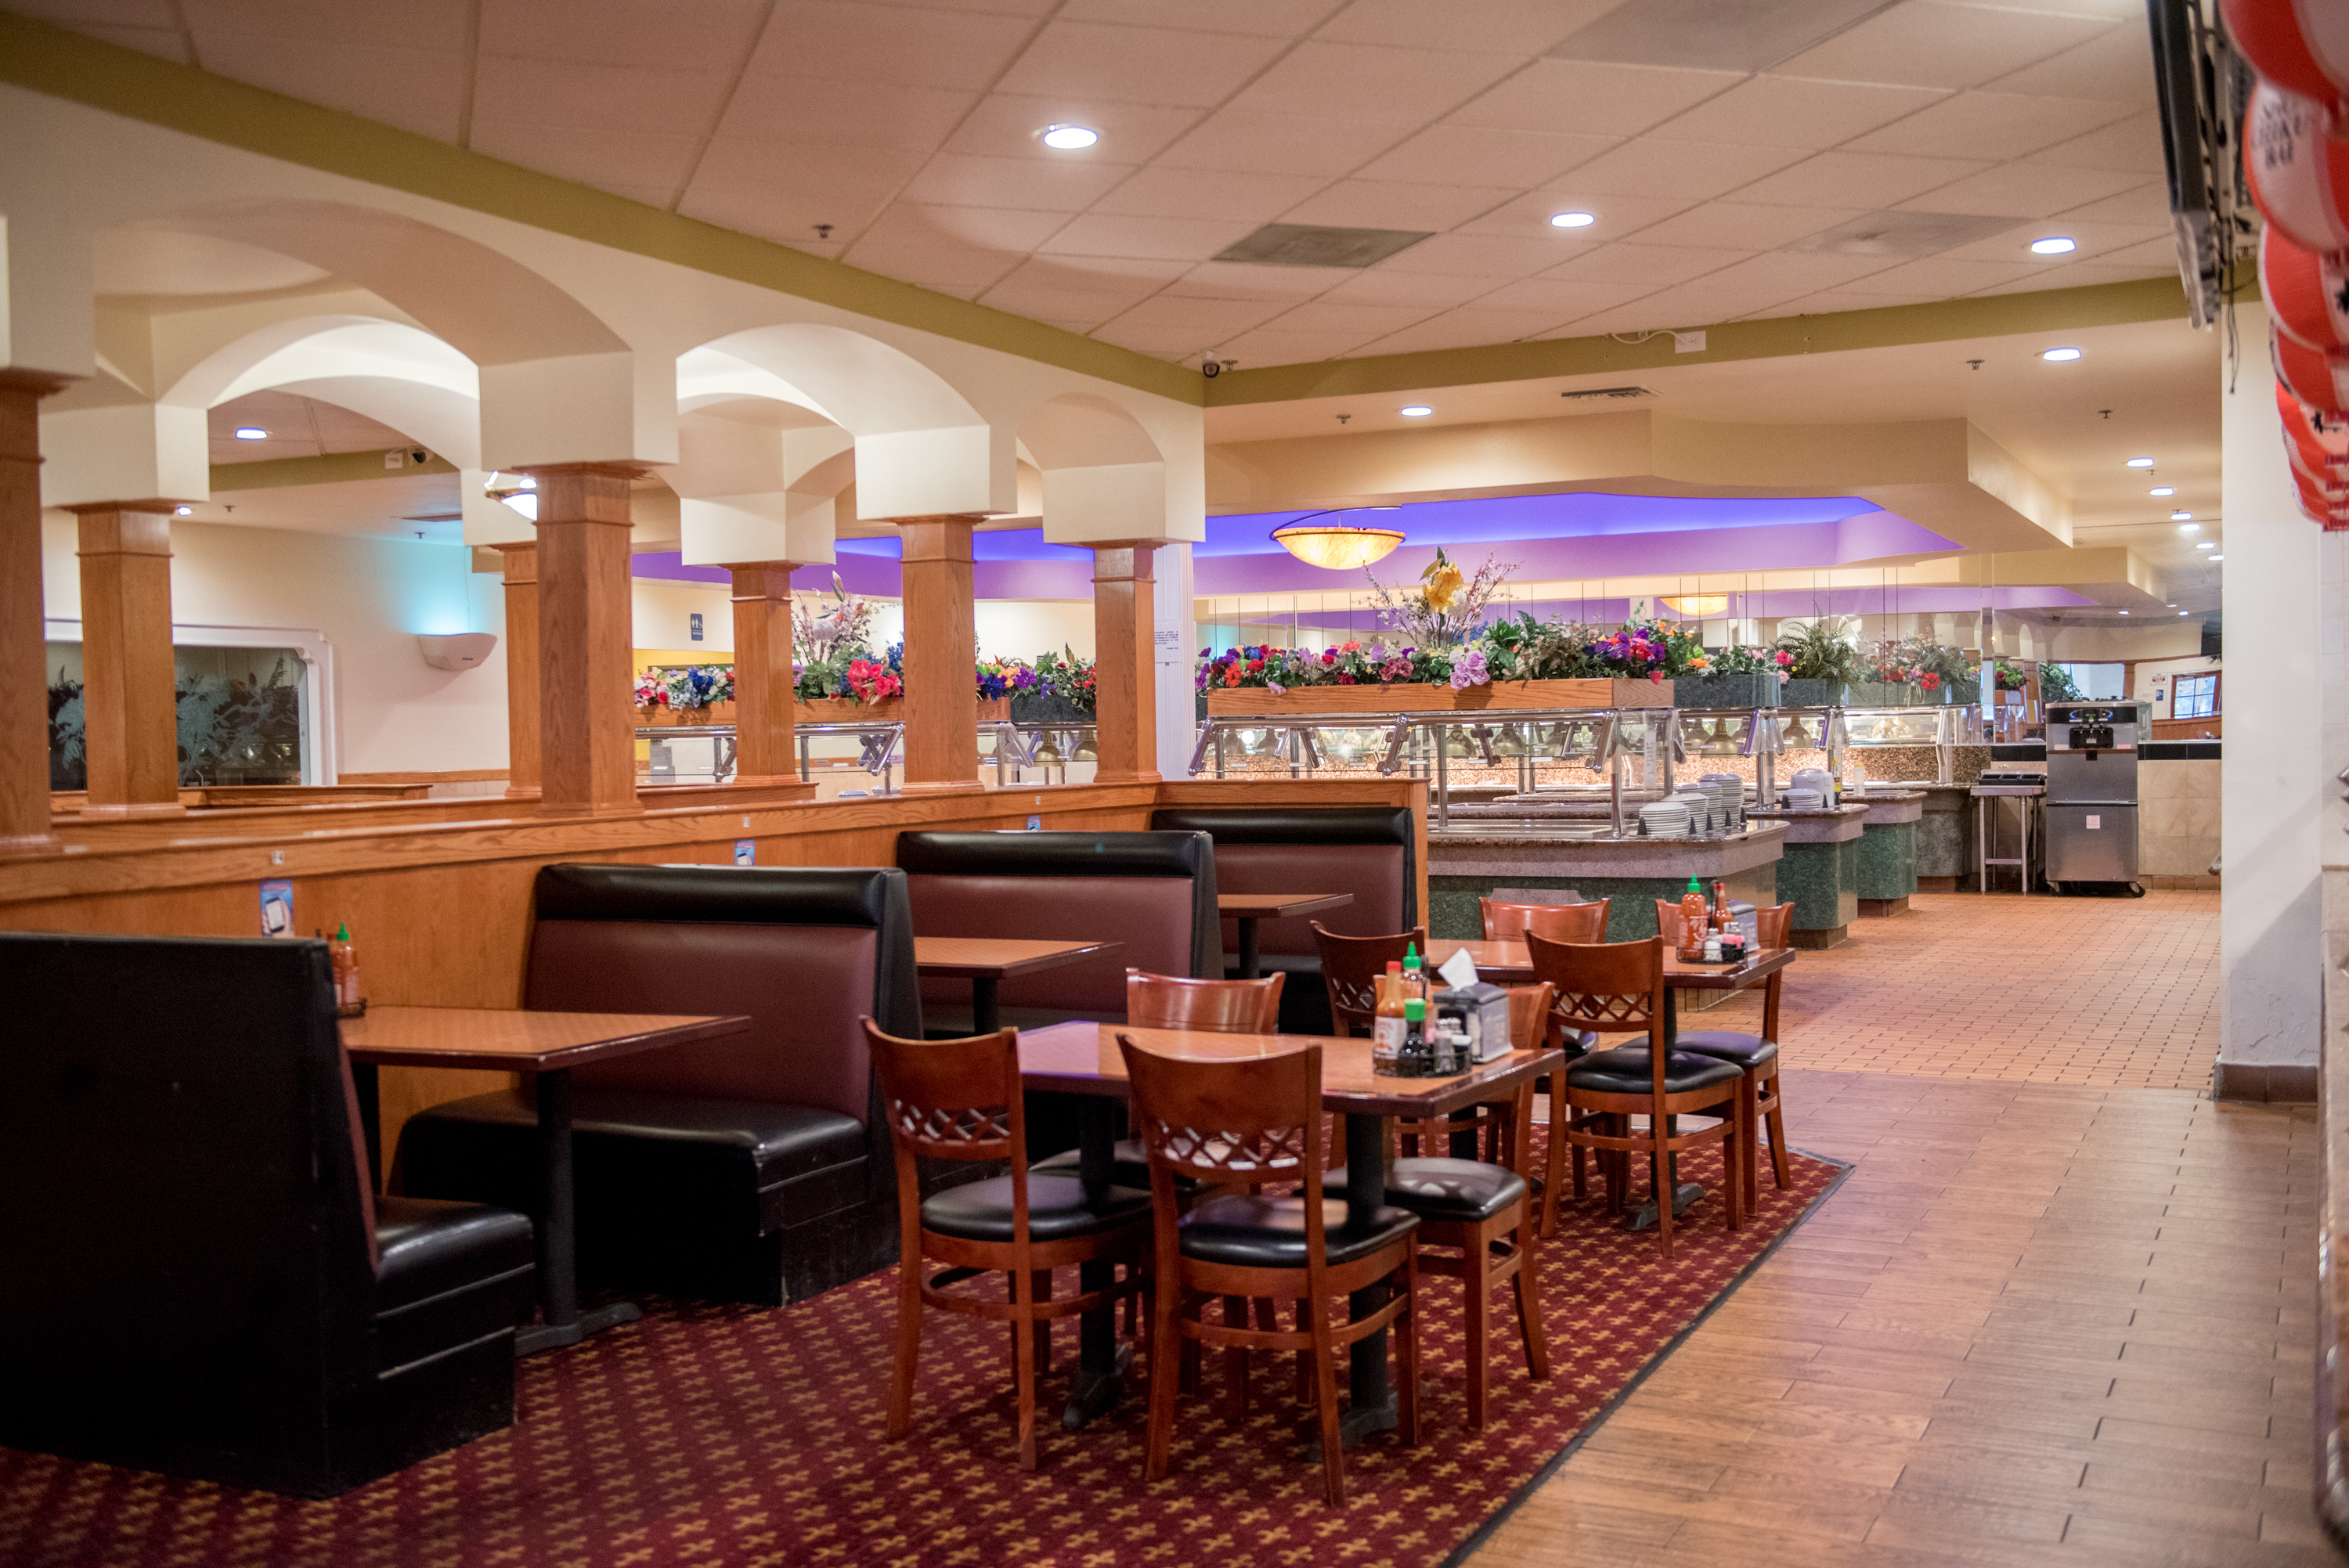 Sapporo Seafood Buffet Coupons near me in Corona, CA 92879 | 8coupons